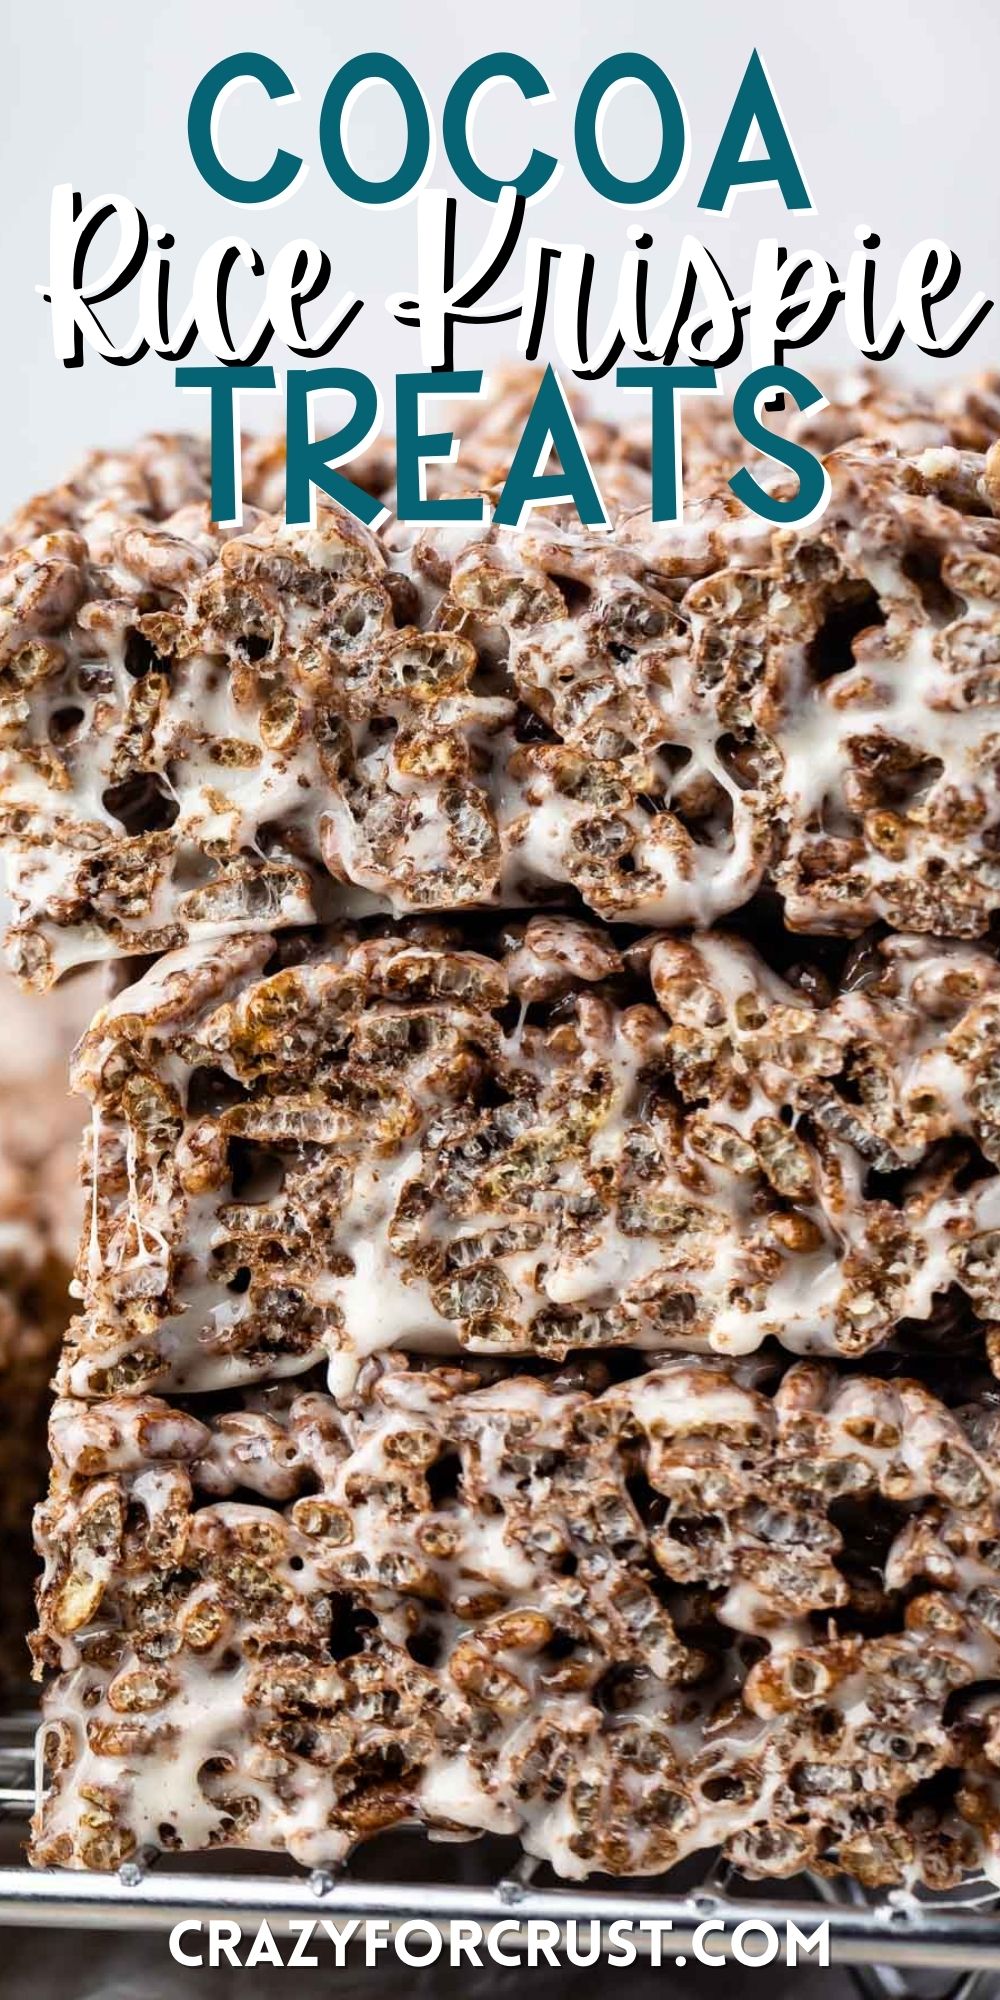 stacked Rice Krispie Treats made with cocoa pebbles with words on the image.